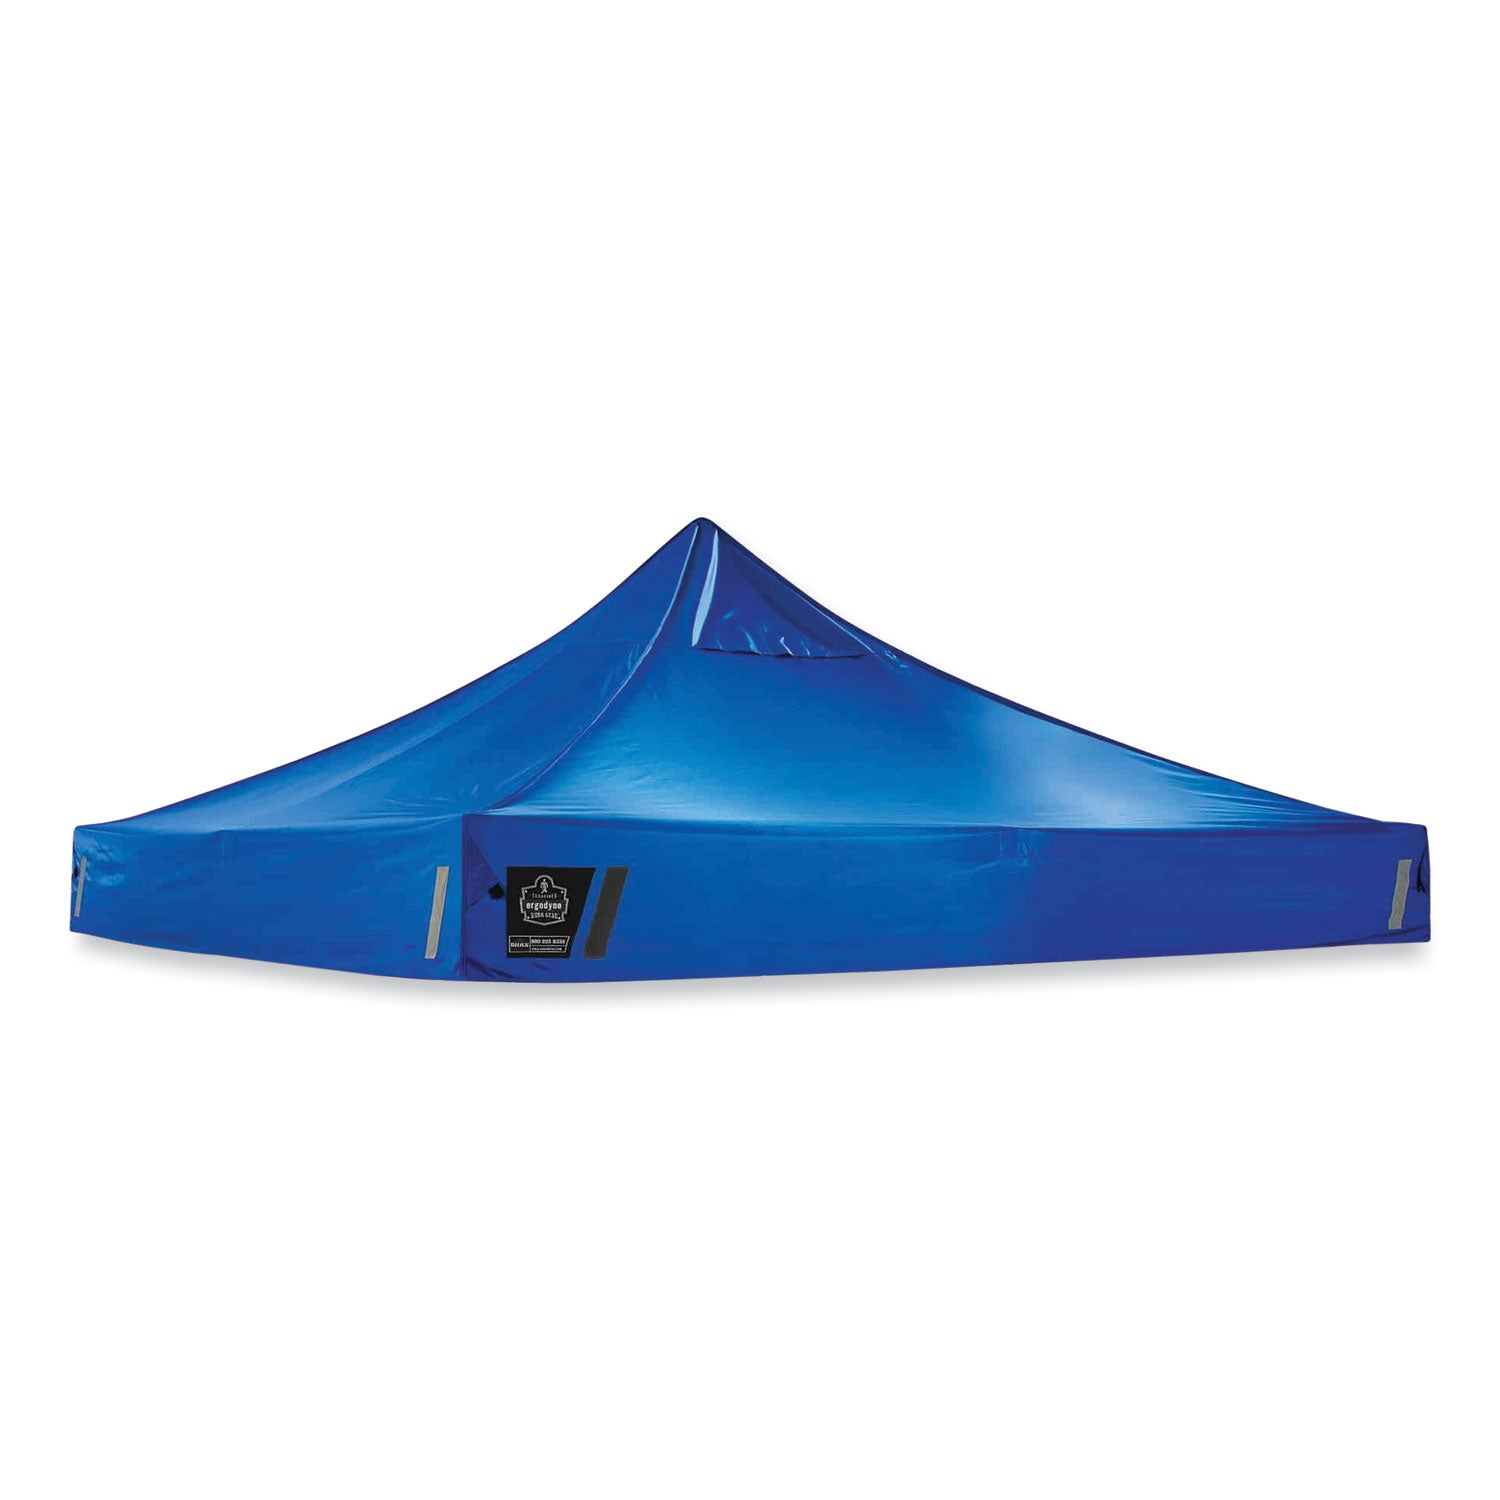 shax-6000c-replacement-pop-up-tent-canopy-for-6000-10-ft-x-10-ft-polyester-blue-ships-in-1-3-business-days_ego12941 - 1